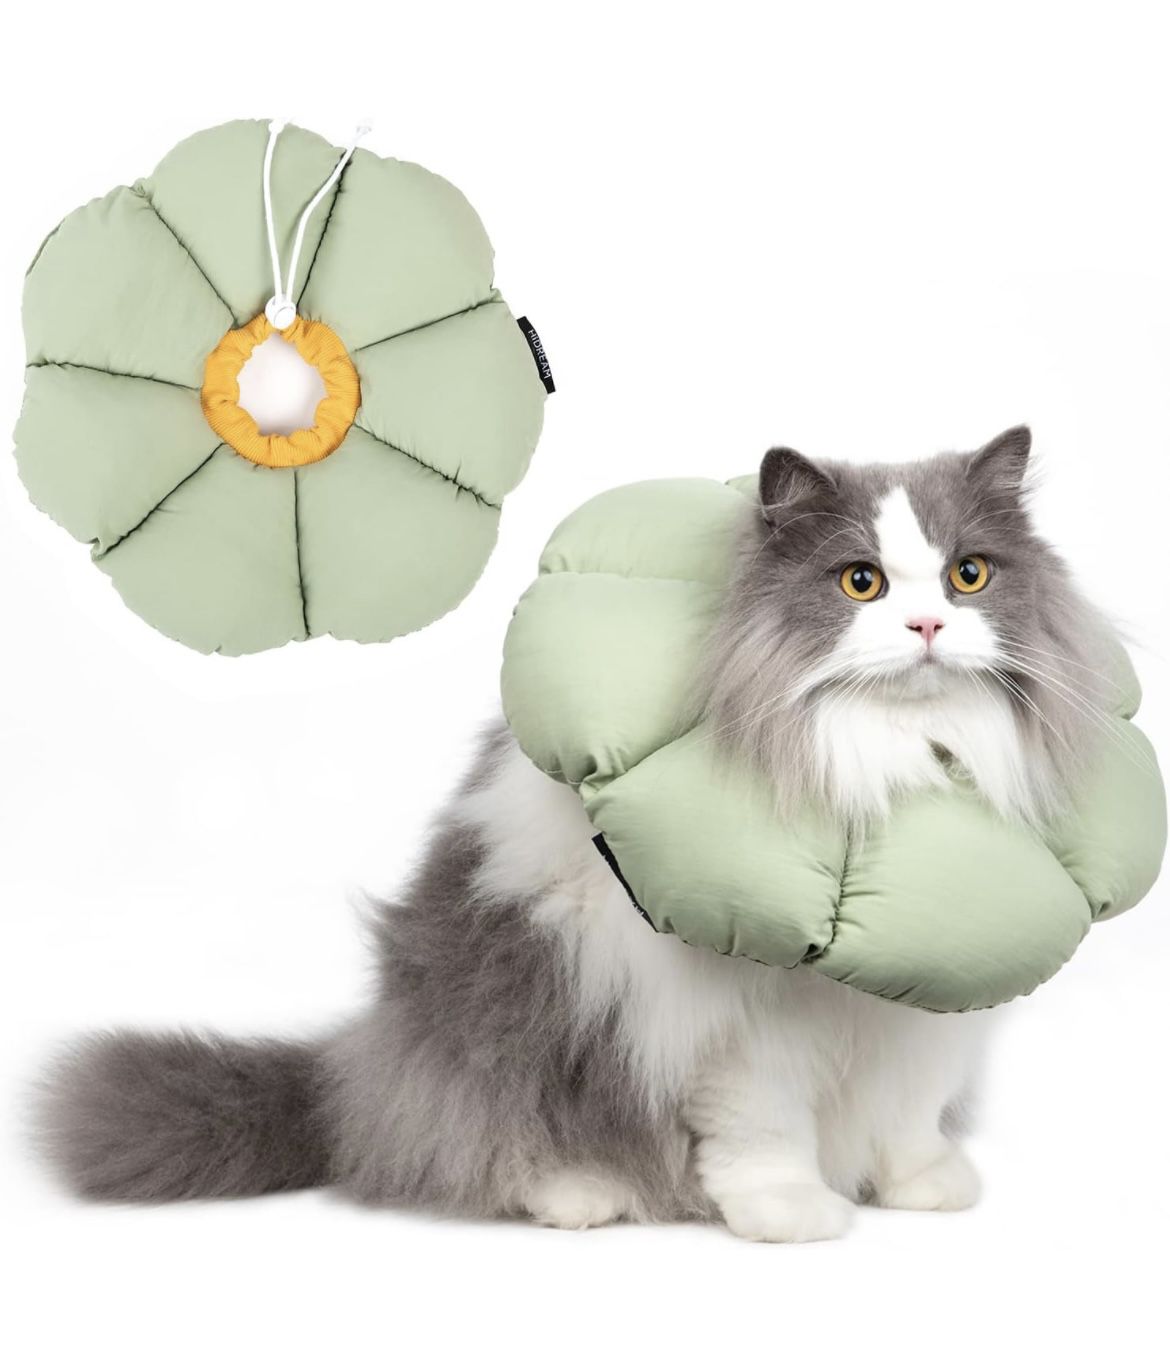 Cat Cone Collar,Cute Waterproof Cat Recovery Collar,Anti-Bite Lick Wound Healing Safety Elizabethan e Collar for Cats,Green Flower All-Season Sty✅NEW✅